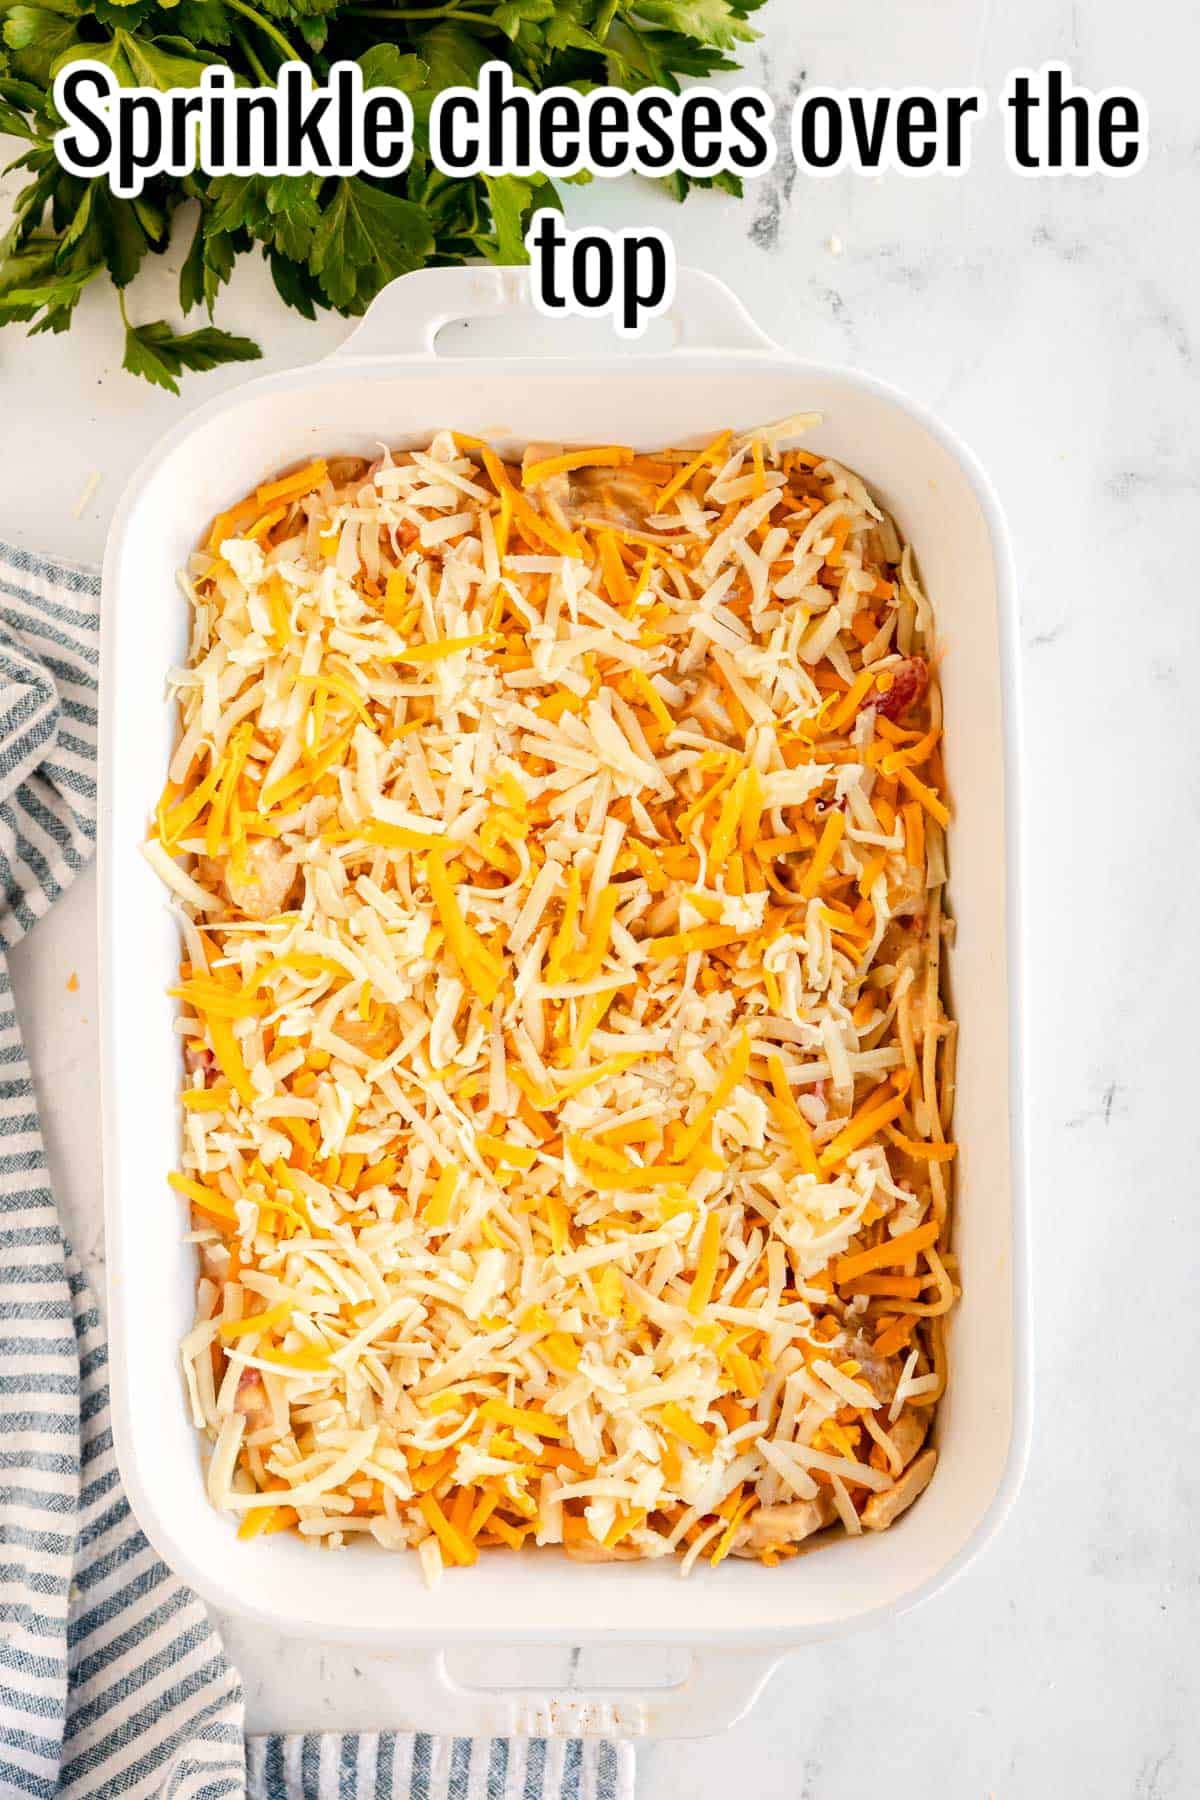 A creamy chicken casserole with cheese sprinkled over the top.